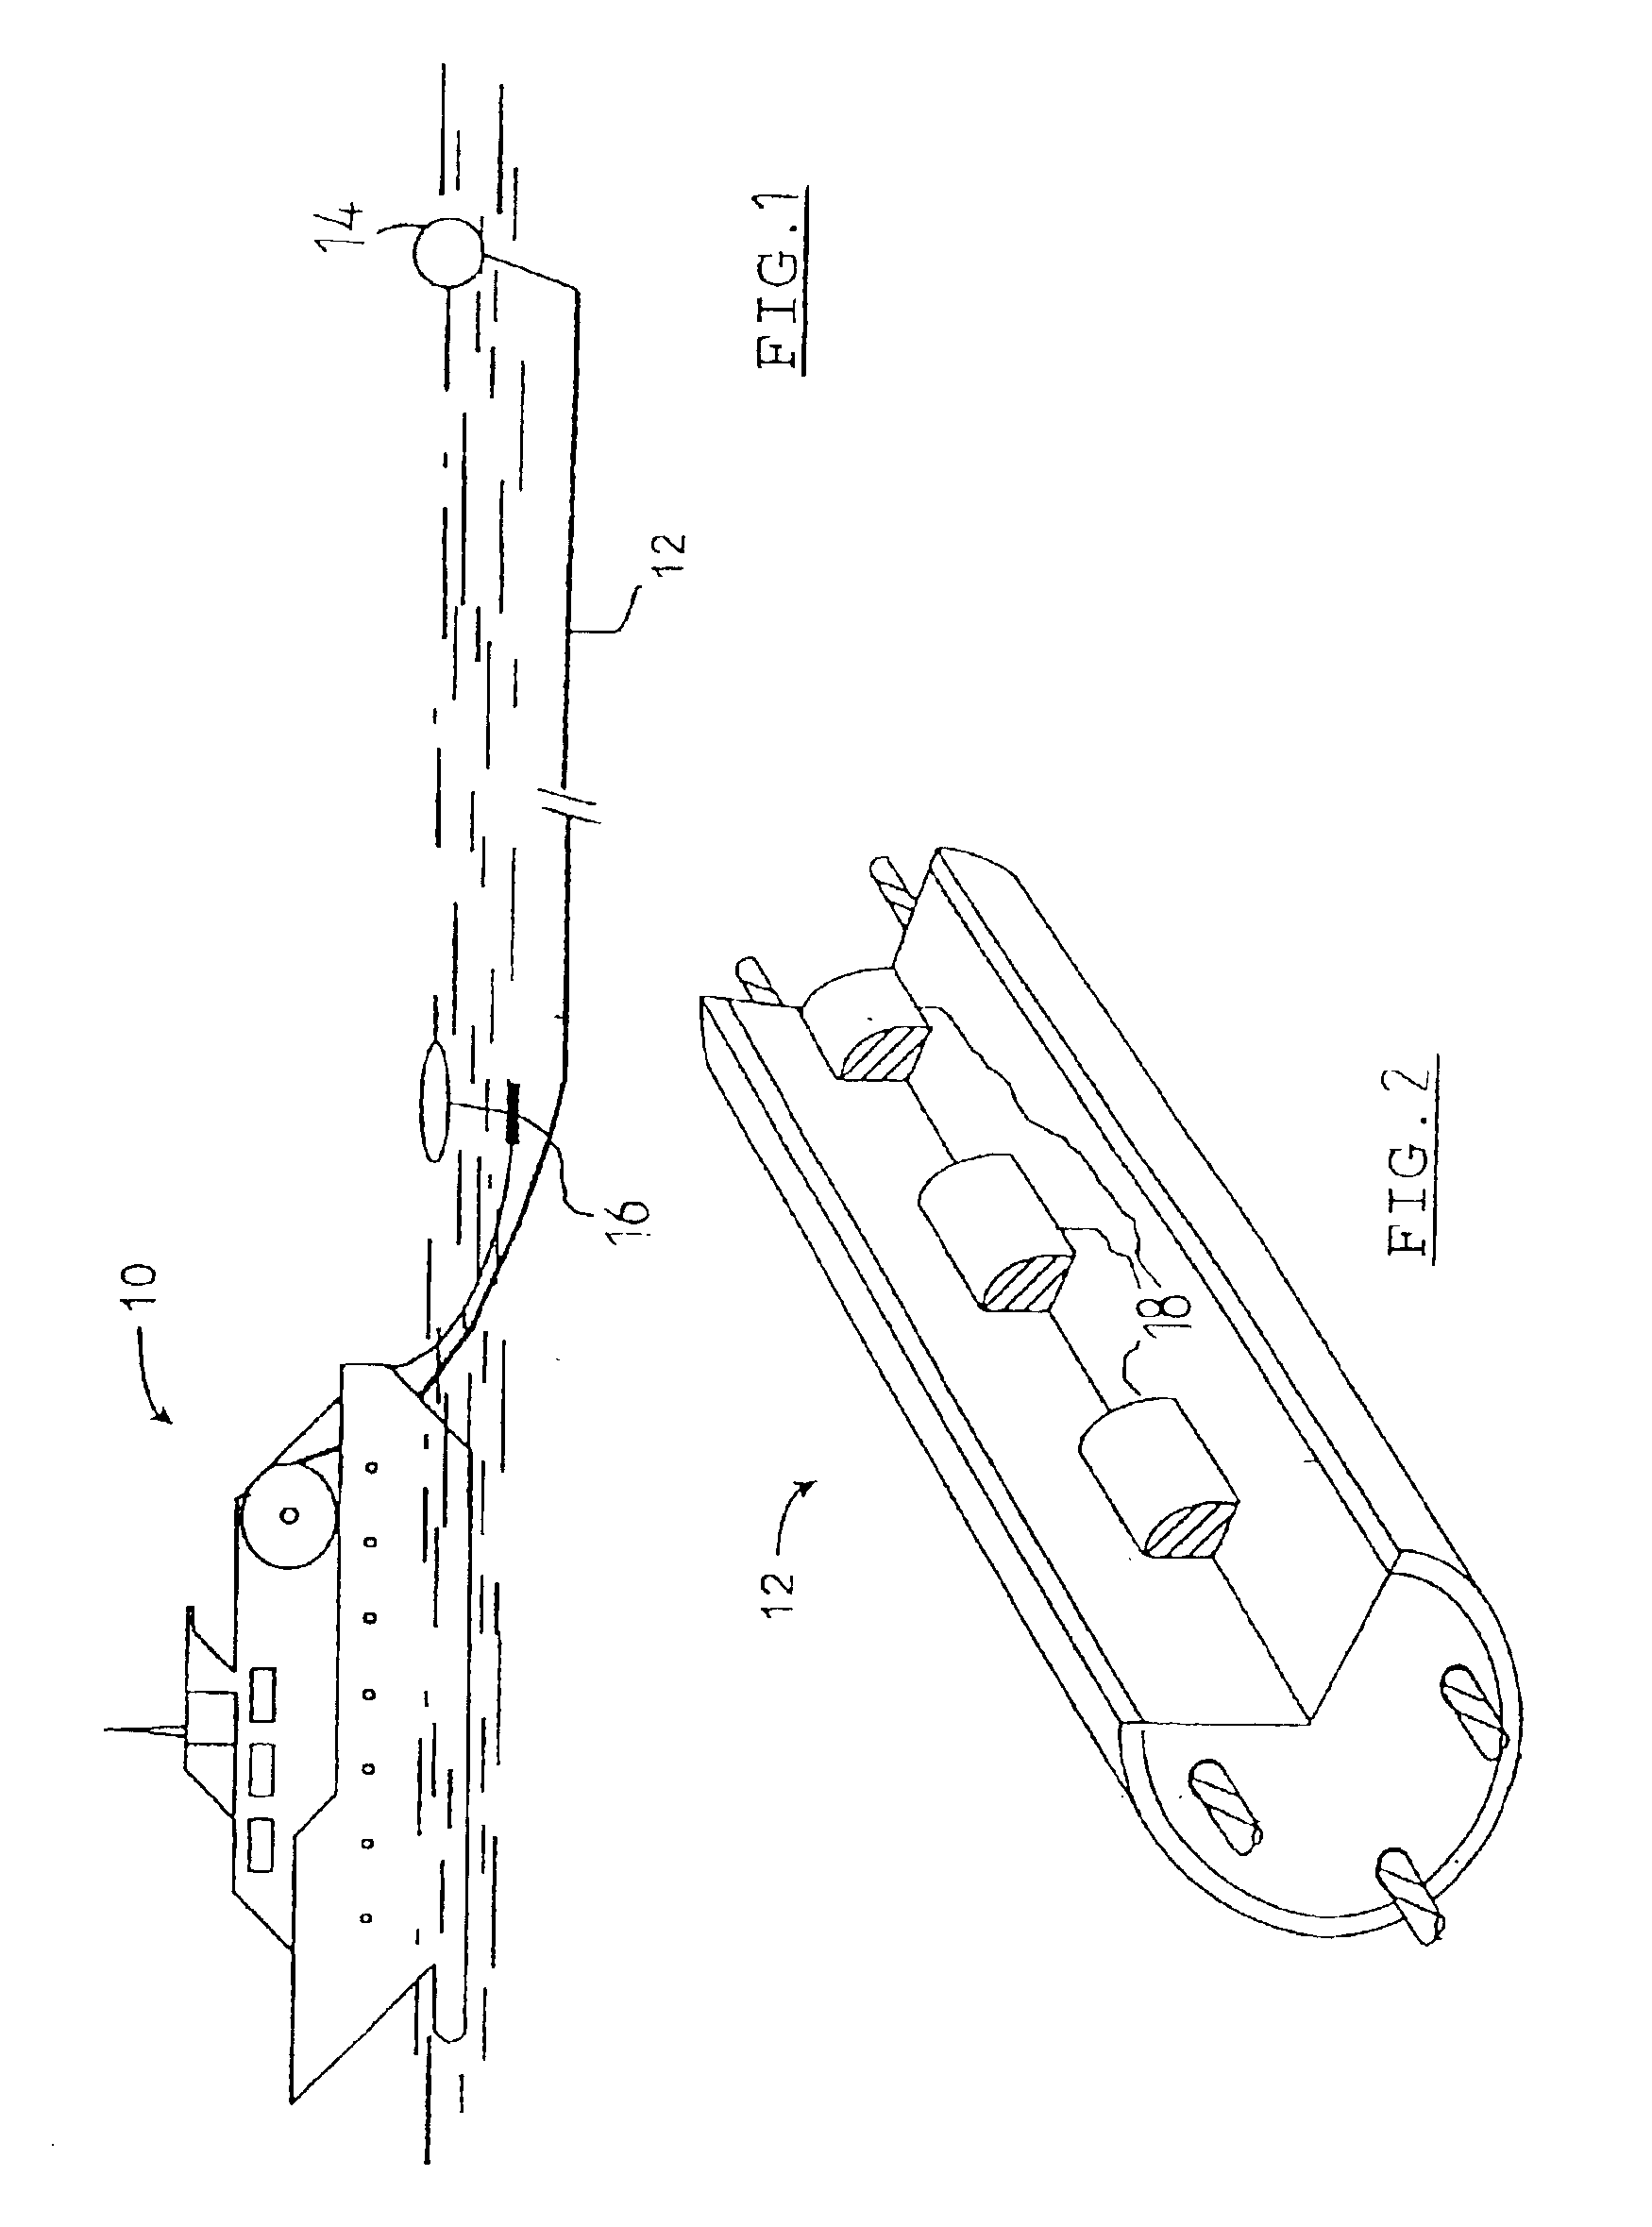 Seismic data acquisition and processing method